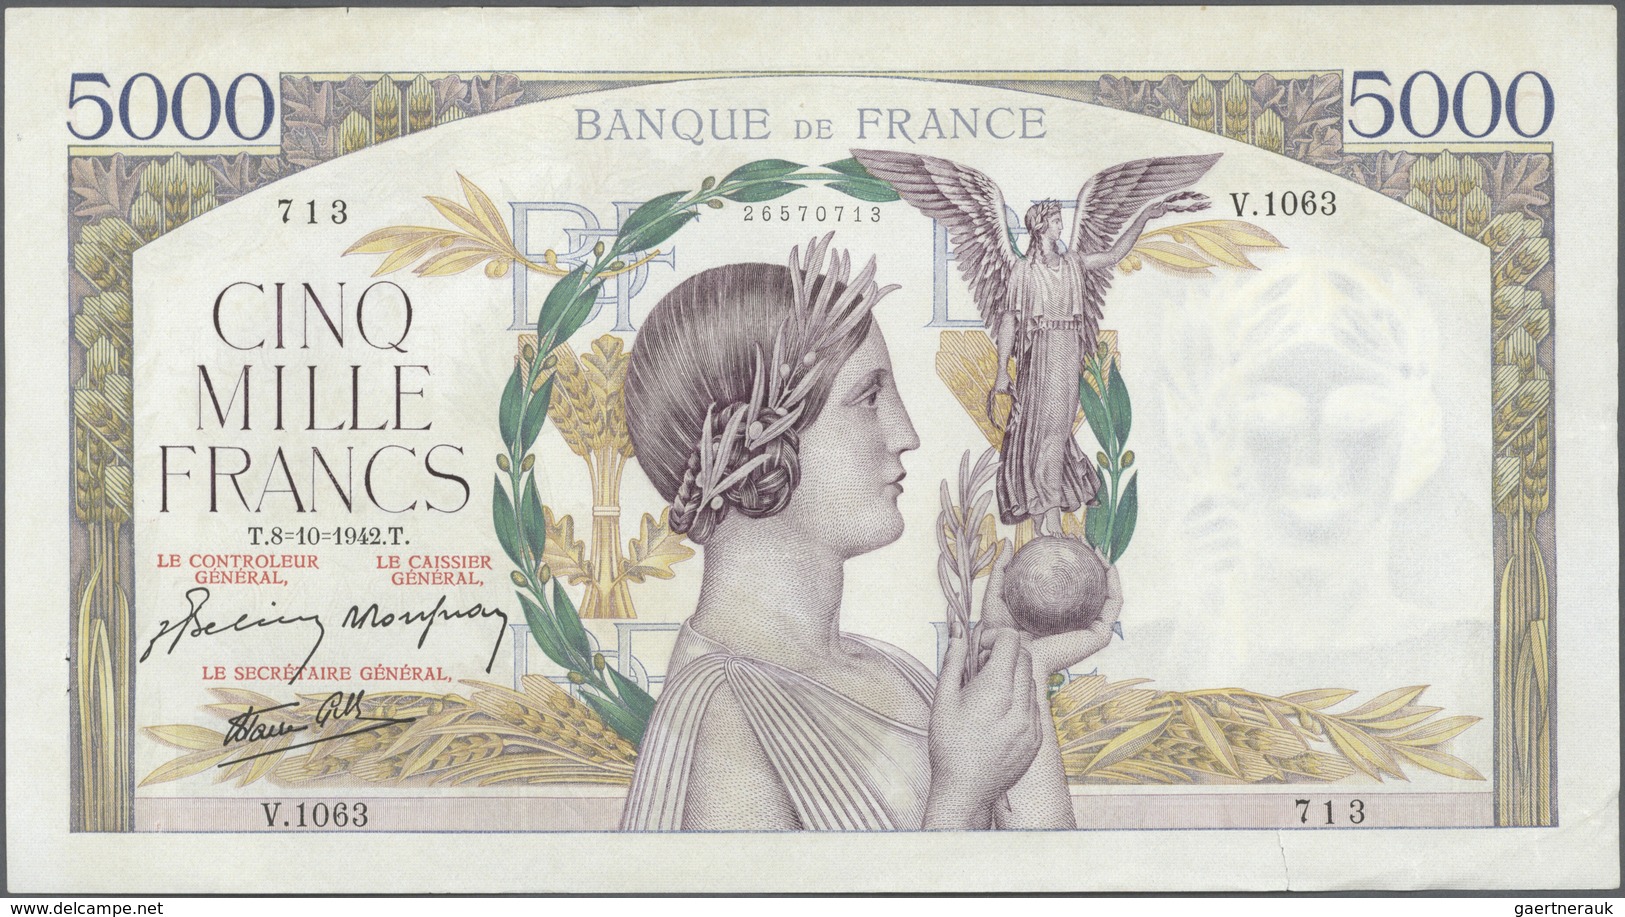 France / Frankreich: large lot of 25 MOSTLY CONSECUTIVE notes of 5000 Francs "Victoire" 1943 P. 97 n